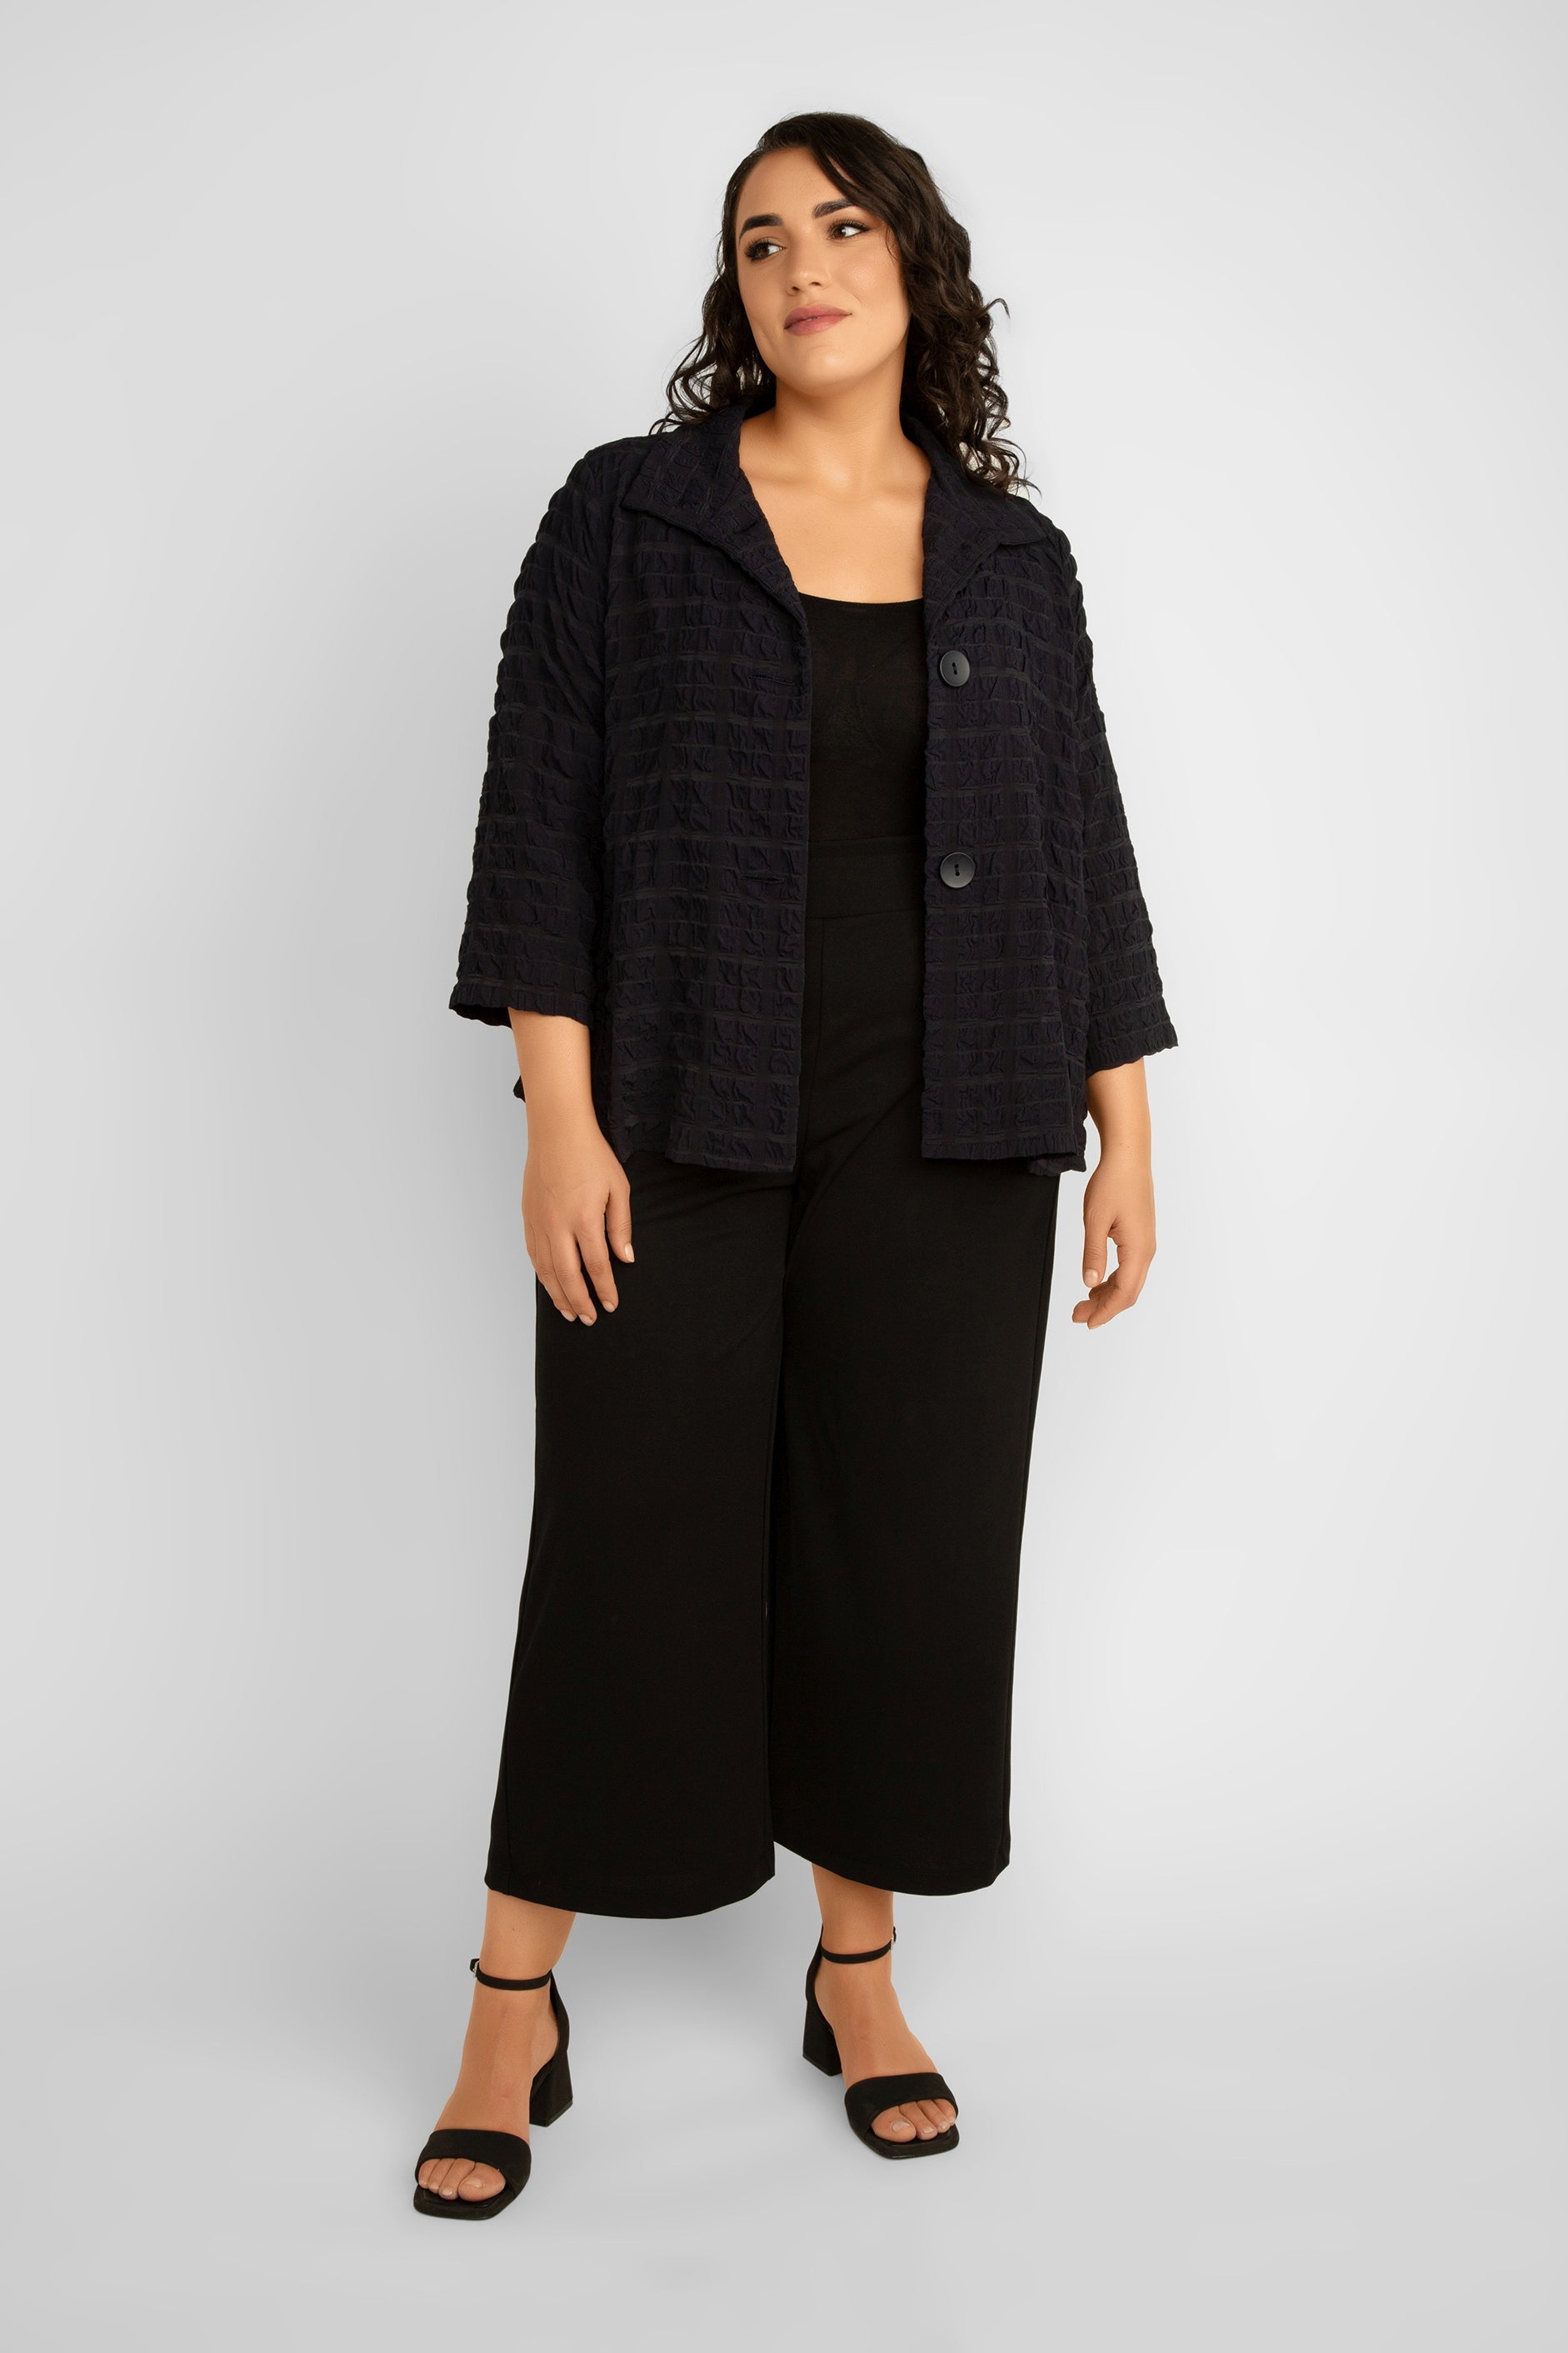 Joseph Ribkoff (241069) Women's 3/4 Sleeve Textured Woven Office Jacket with Stand Collar & Button Front in Navy